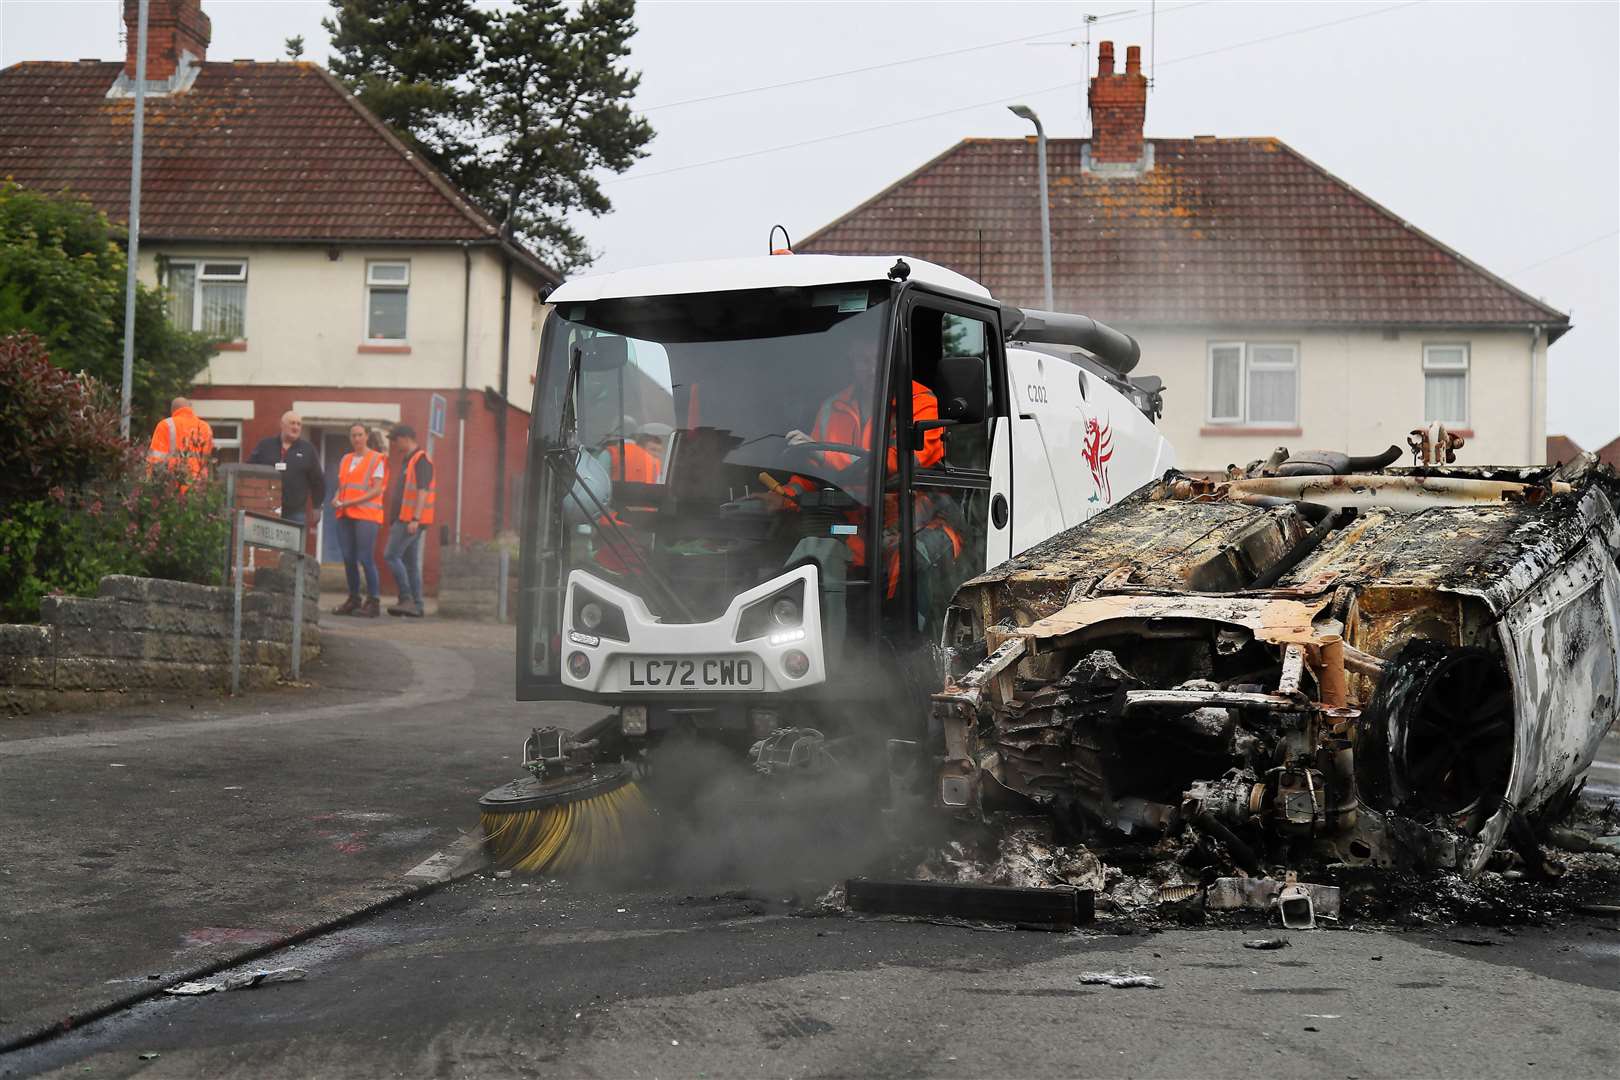 Council workers clear debris from the area immediately around a car that was set alight during the riot (PA)